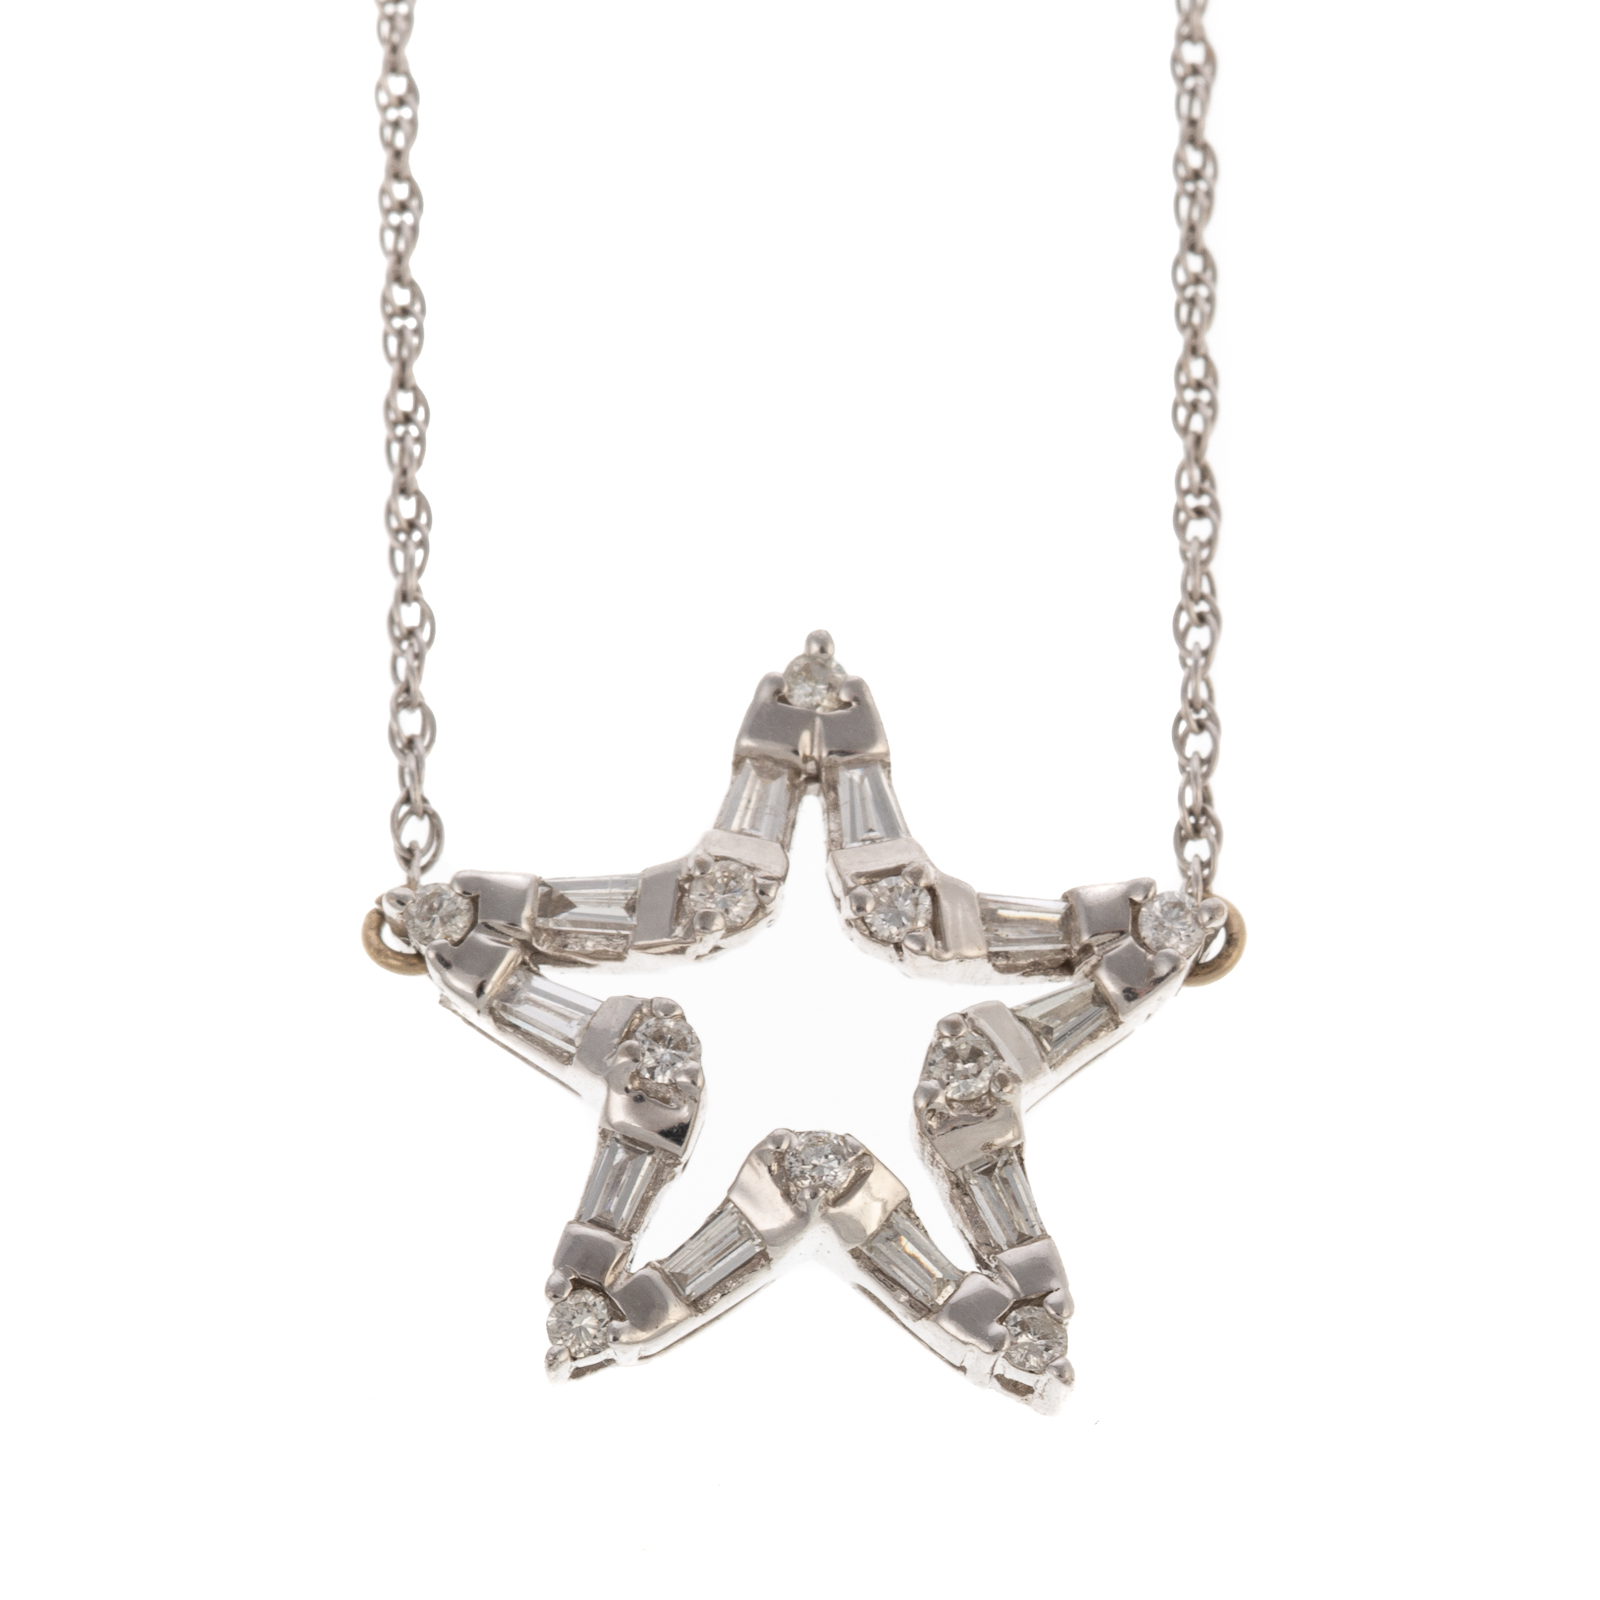 AN OPEN DIAMOND STAR NECKLACE IN